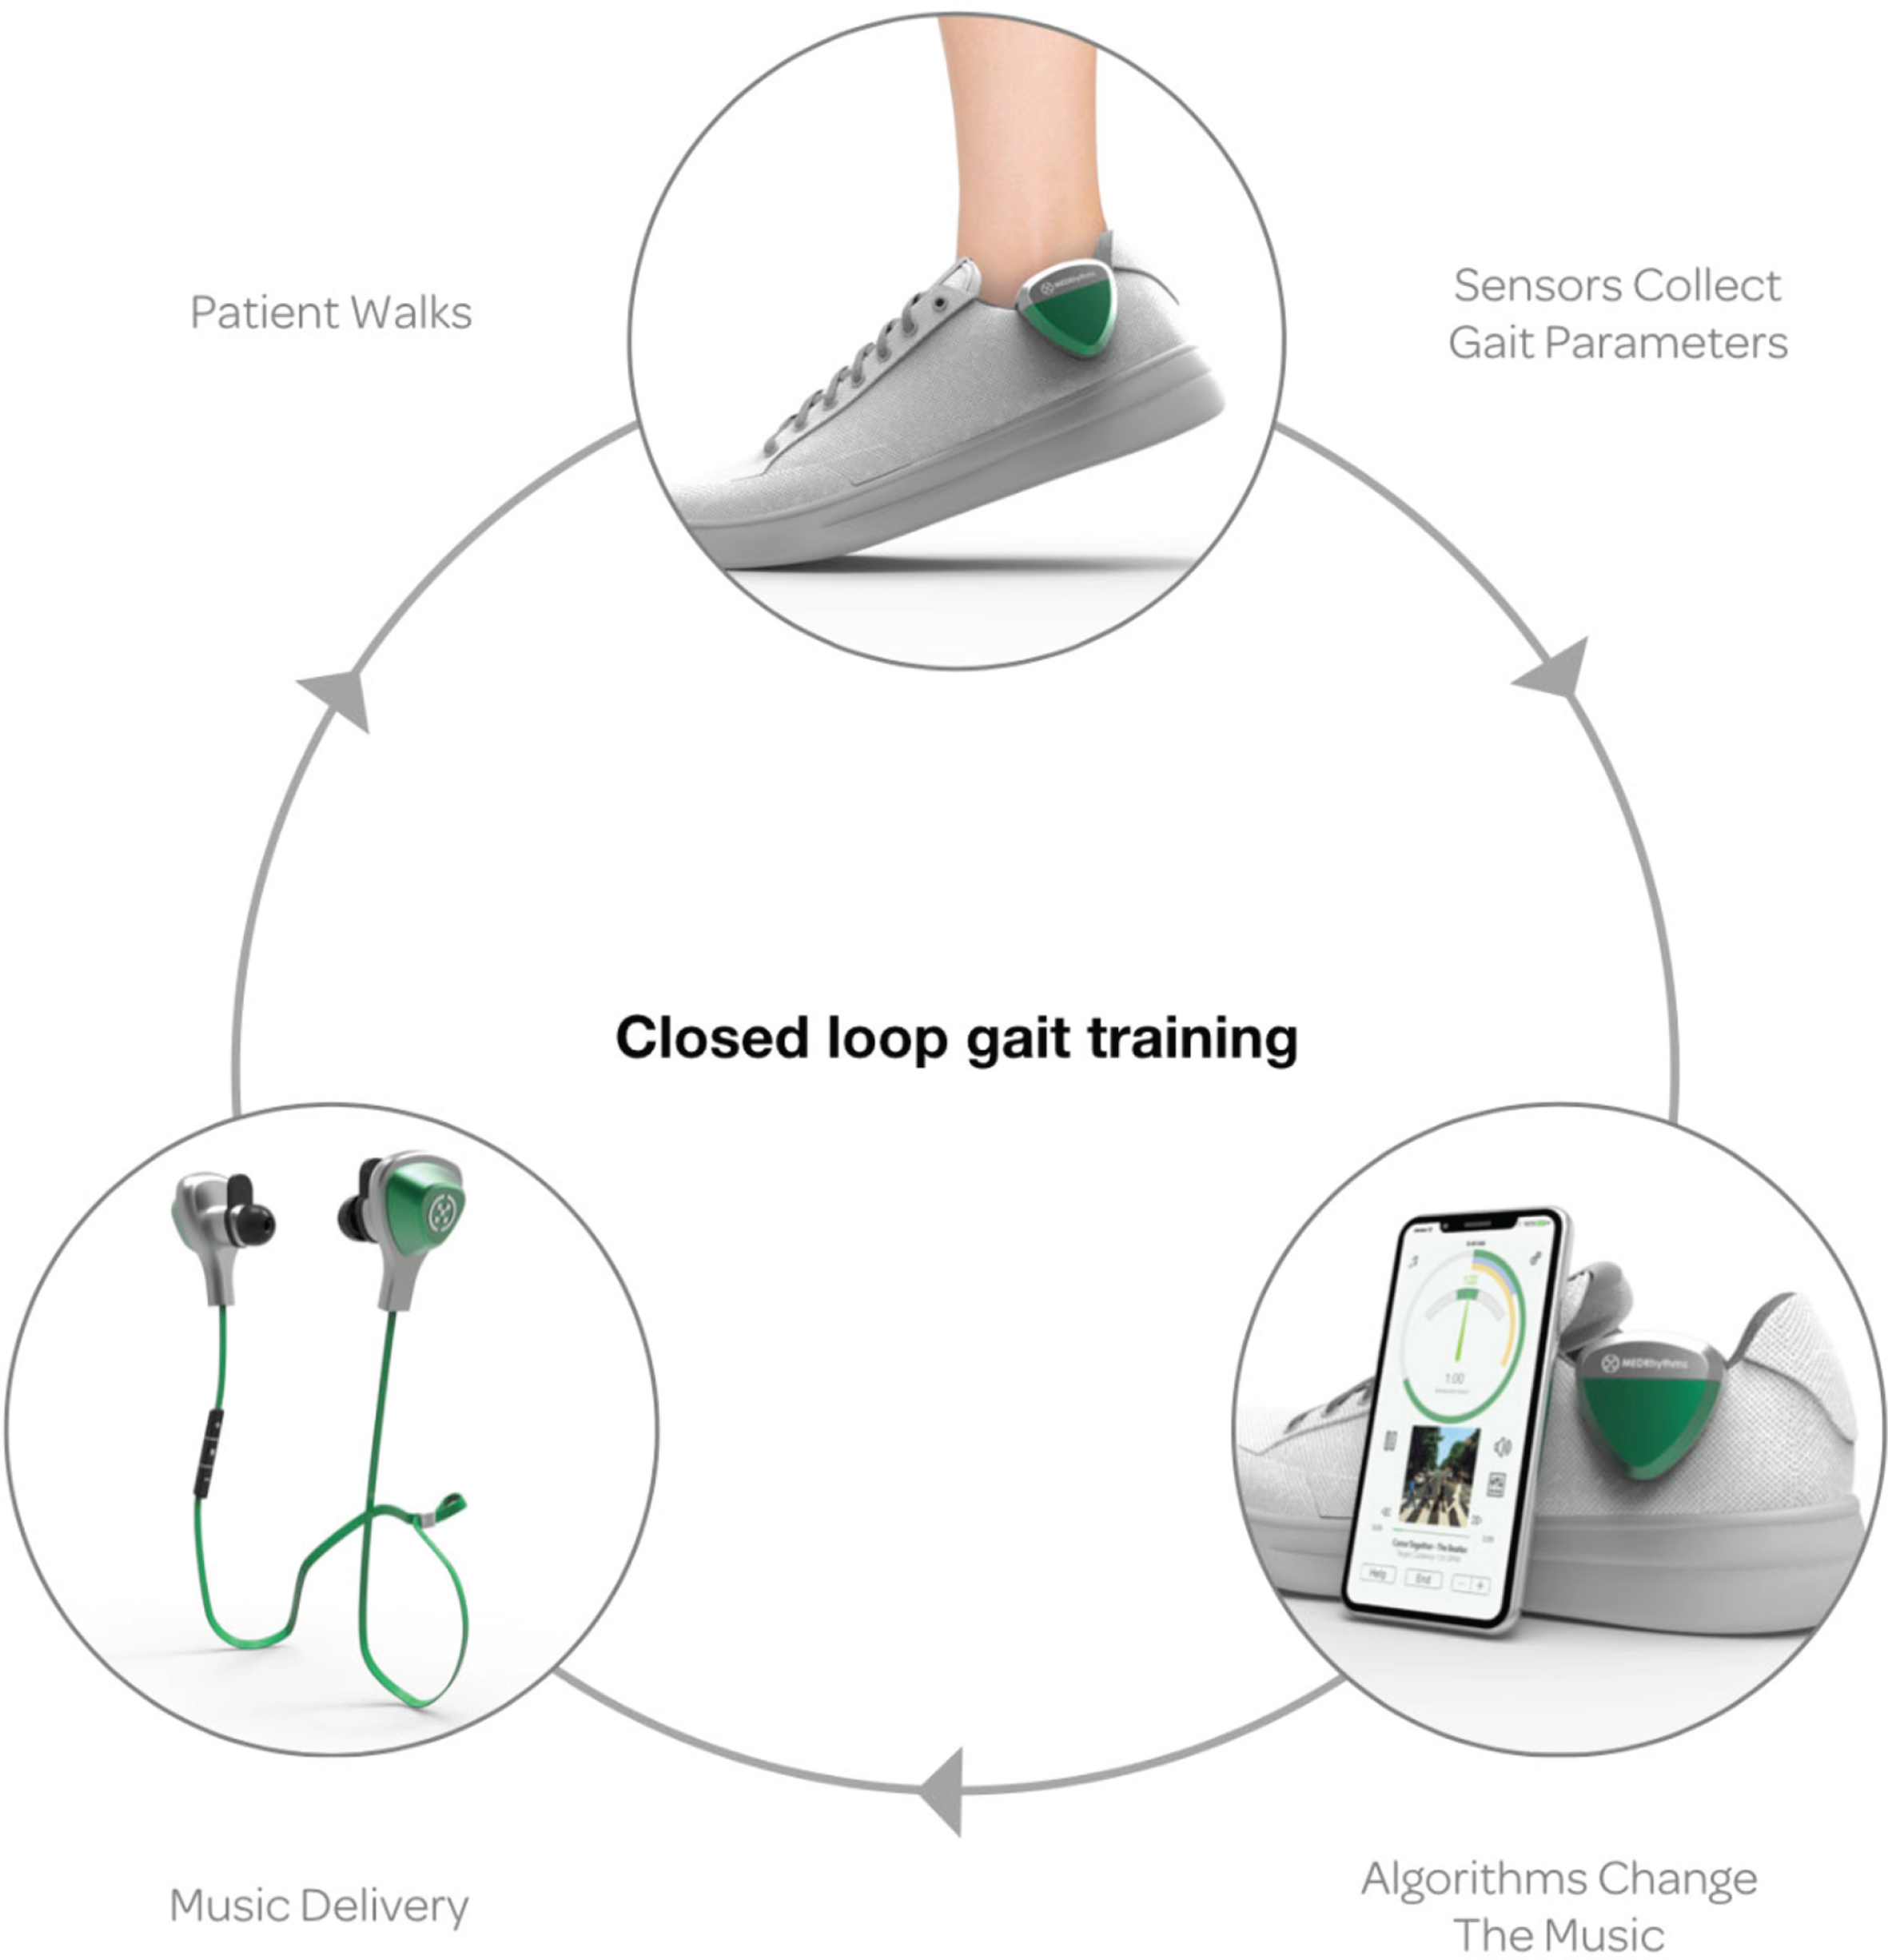 Digital Closed Loop Gait Training Therapeutic In the top portion of the figure, a sensor is worn on the shoe to collect real-time walking cadence. A smartphone (lower right) houses the music playlist and delivers the acoustic signals through headphones worn (lower left) by the patient. Algorithms time shift the music to match the patient’s cadence and modulate according to entrainment outcomes.